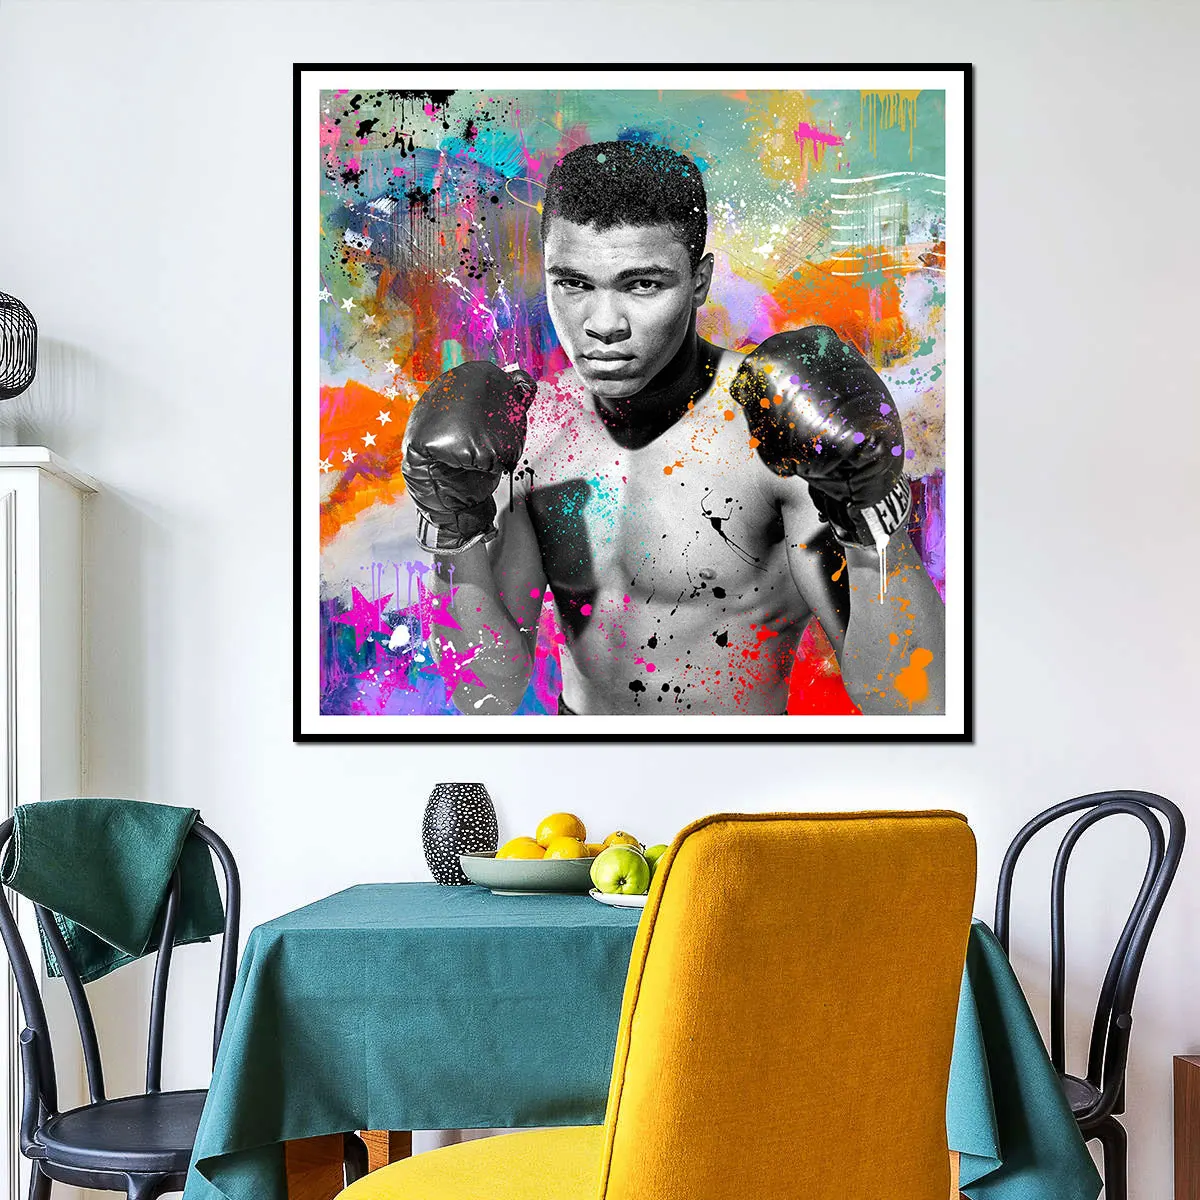 

Muhammad Ali Boxing Graffiti Pop Art Canvas Painting Poster Home Decor Wall Art Decoration Picture For Living Bed Kids Bath Room